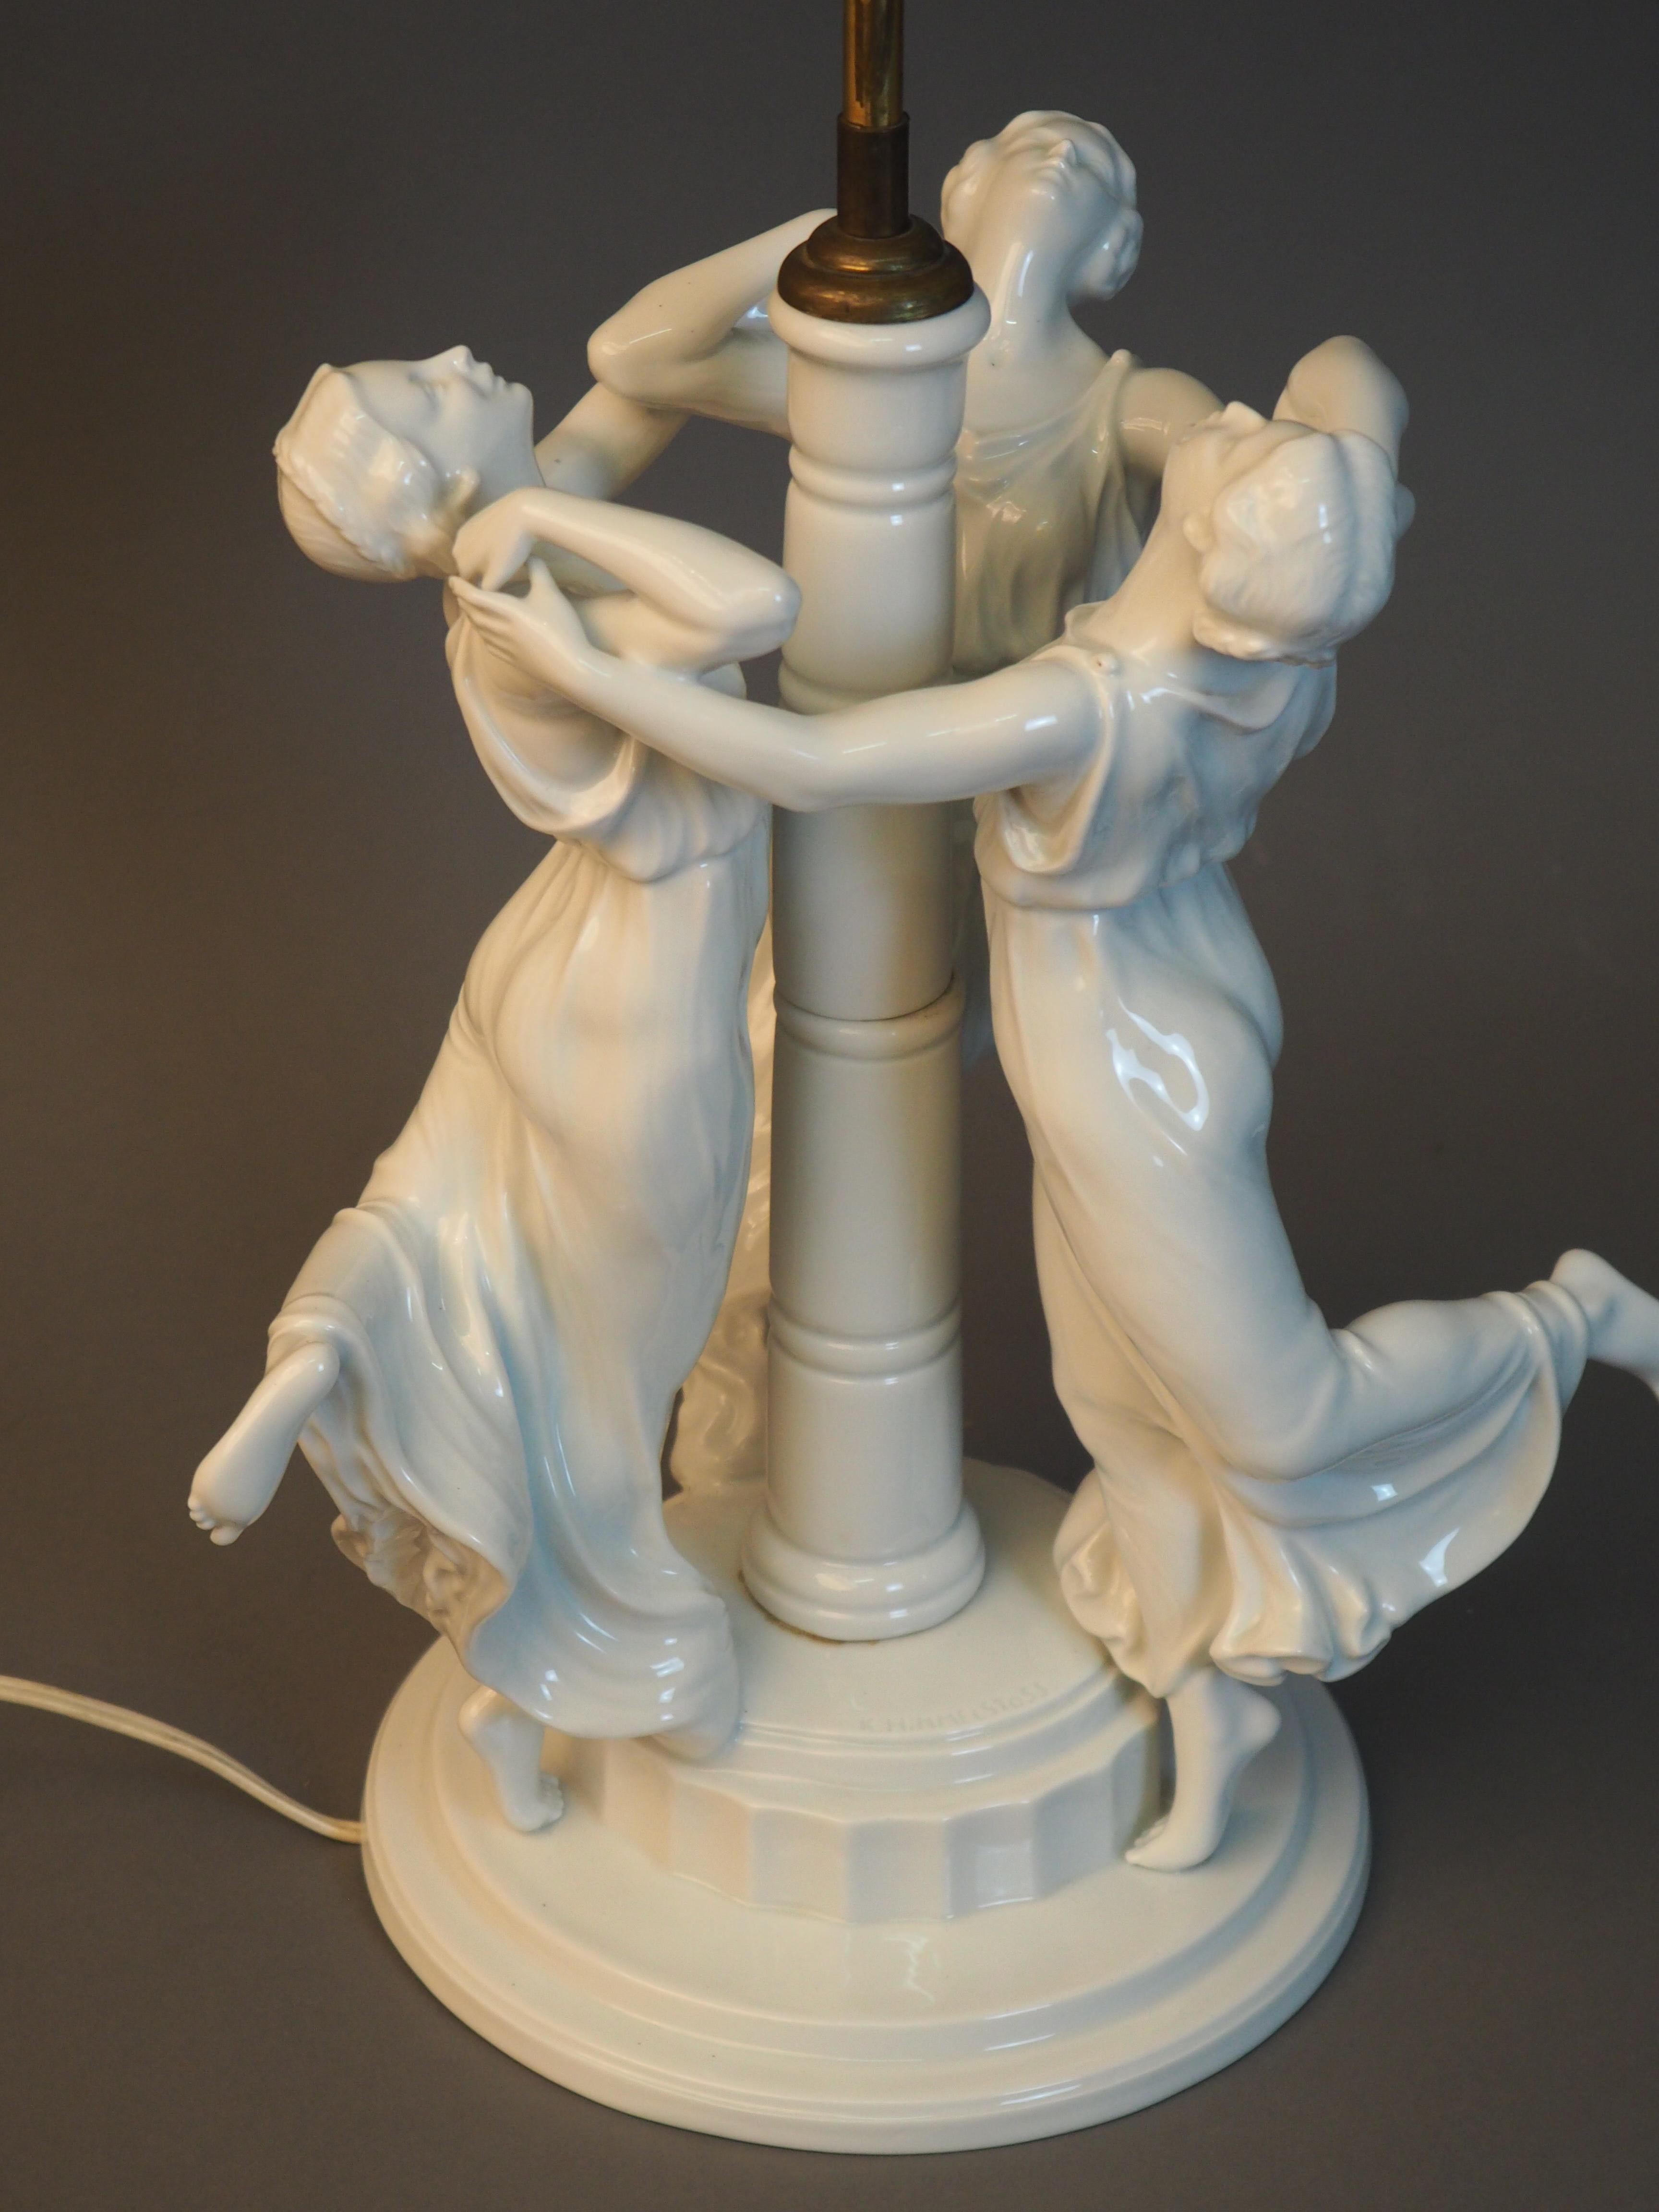 Very rare figurine group “Festreigen” table lamp, designed by Karl Himmelstoss, 1913, executed by Rosenthal, 1916.
White porcelain, three dancing graces in long robes on stepped, profiled and fluted round base, signed on the base (embossed)